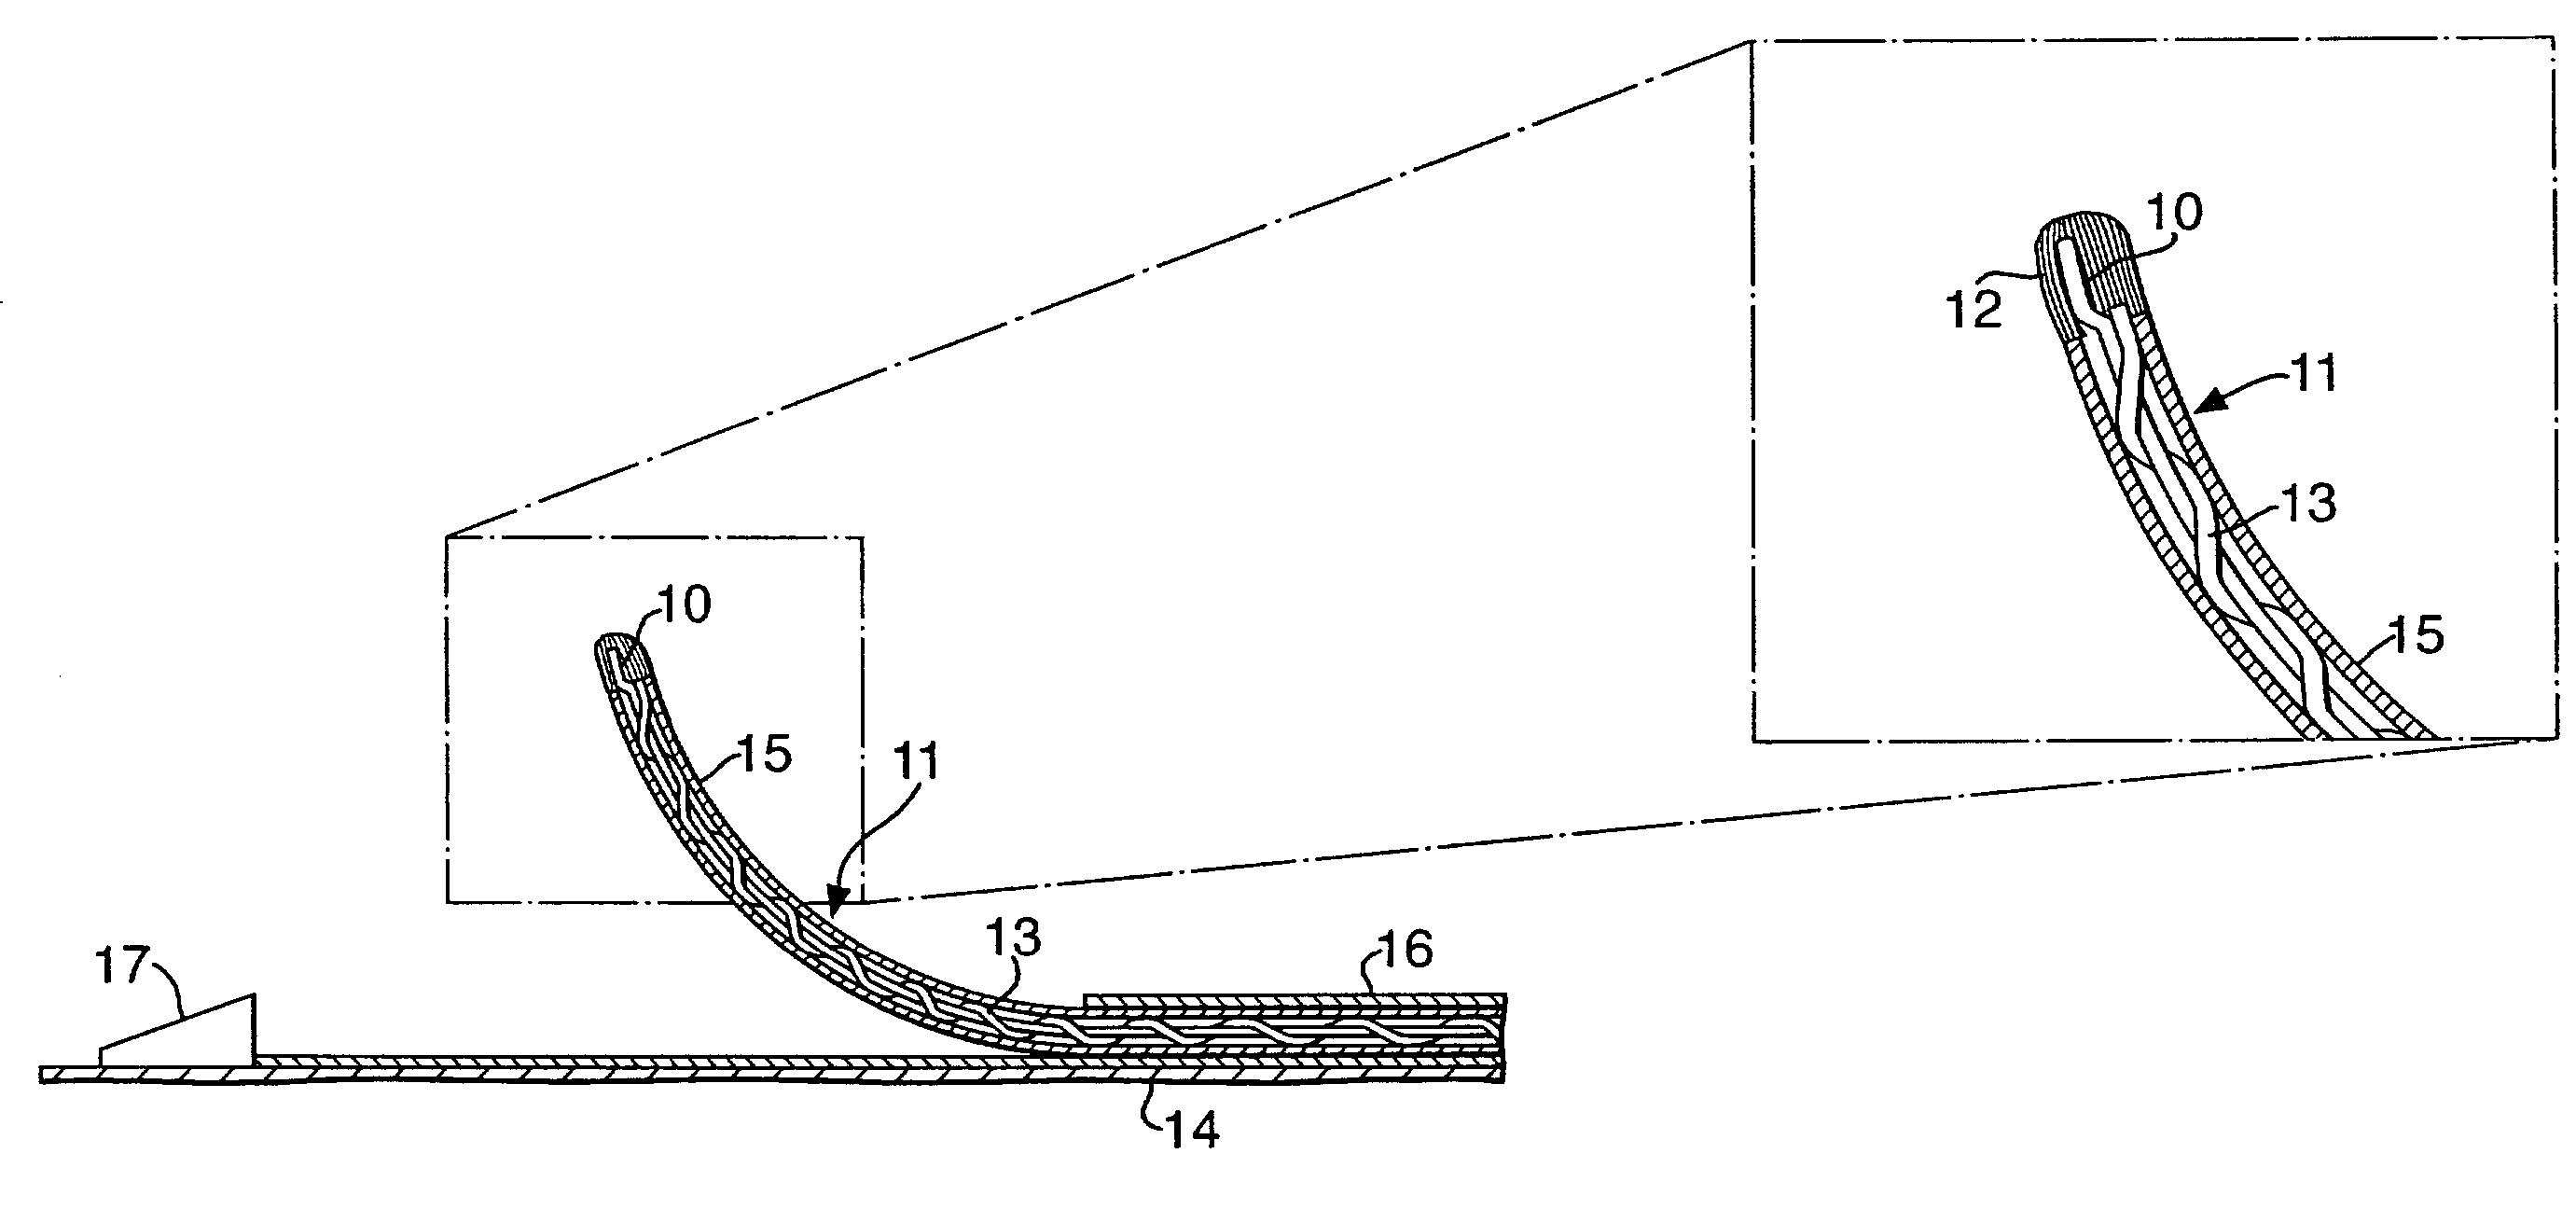 Catheter positioning device